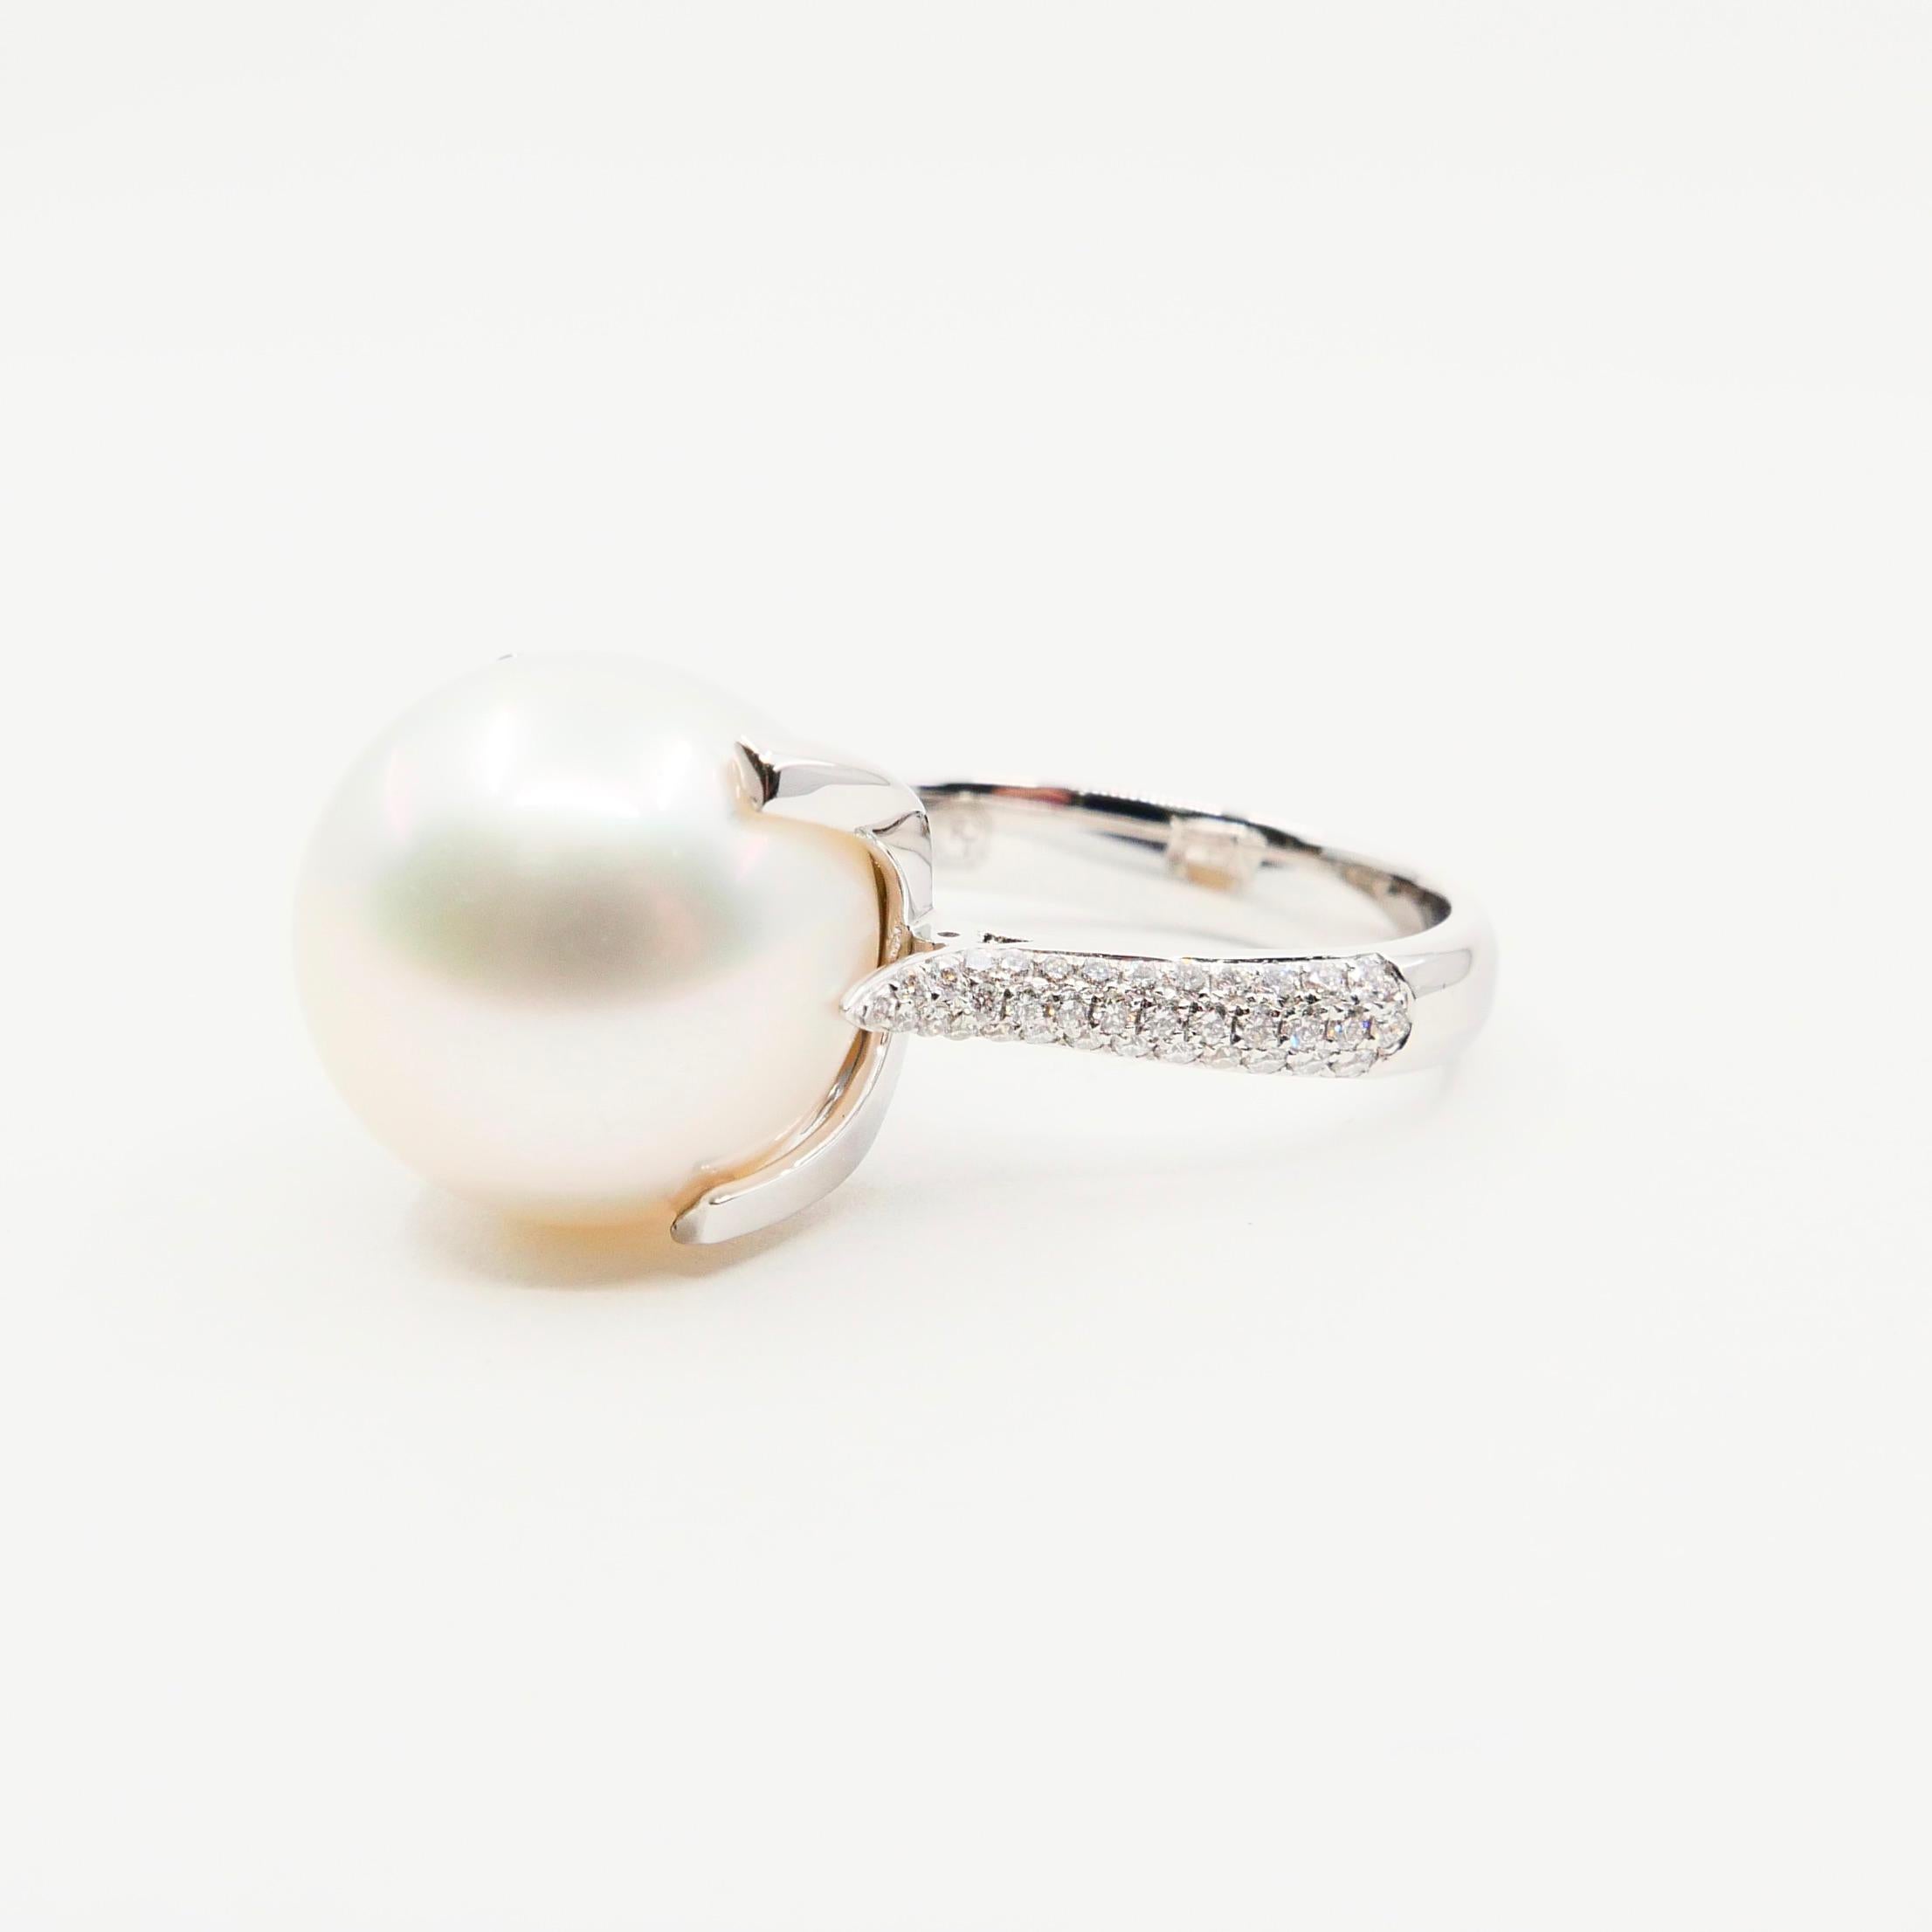 Women's Certified South Sea Pearl and Diamond Ring, Our Signature Design